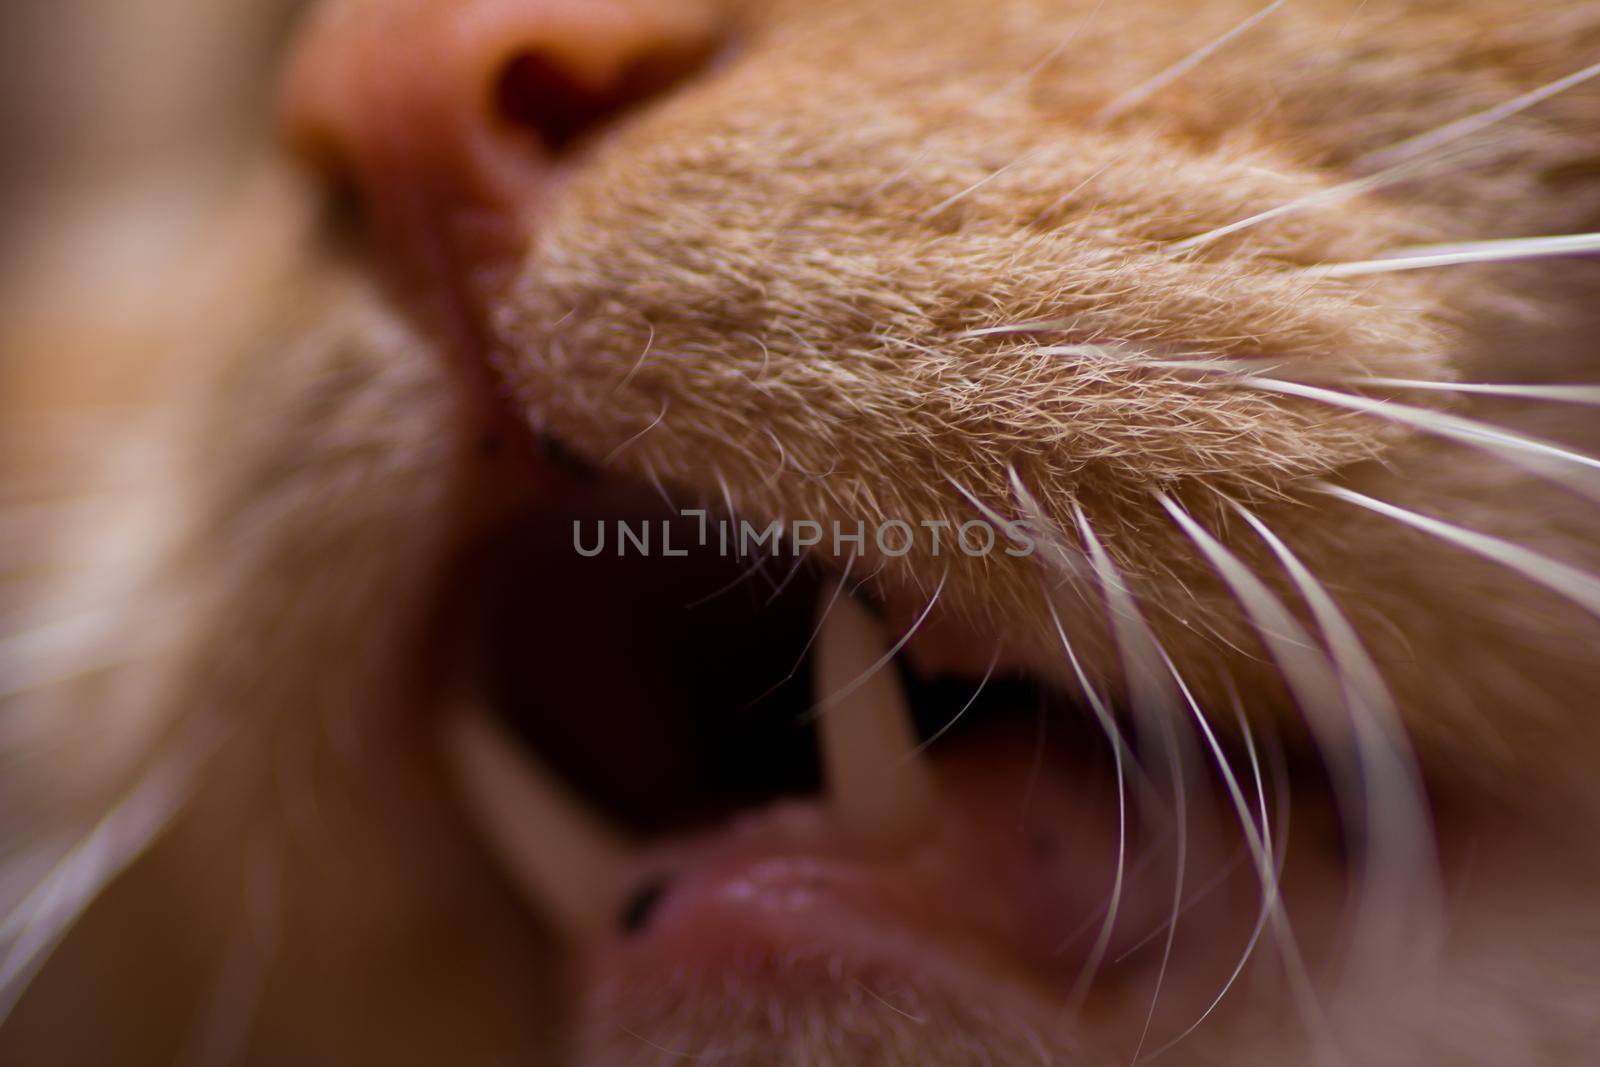 cat mouth with teeth, tongue and mustache Â